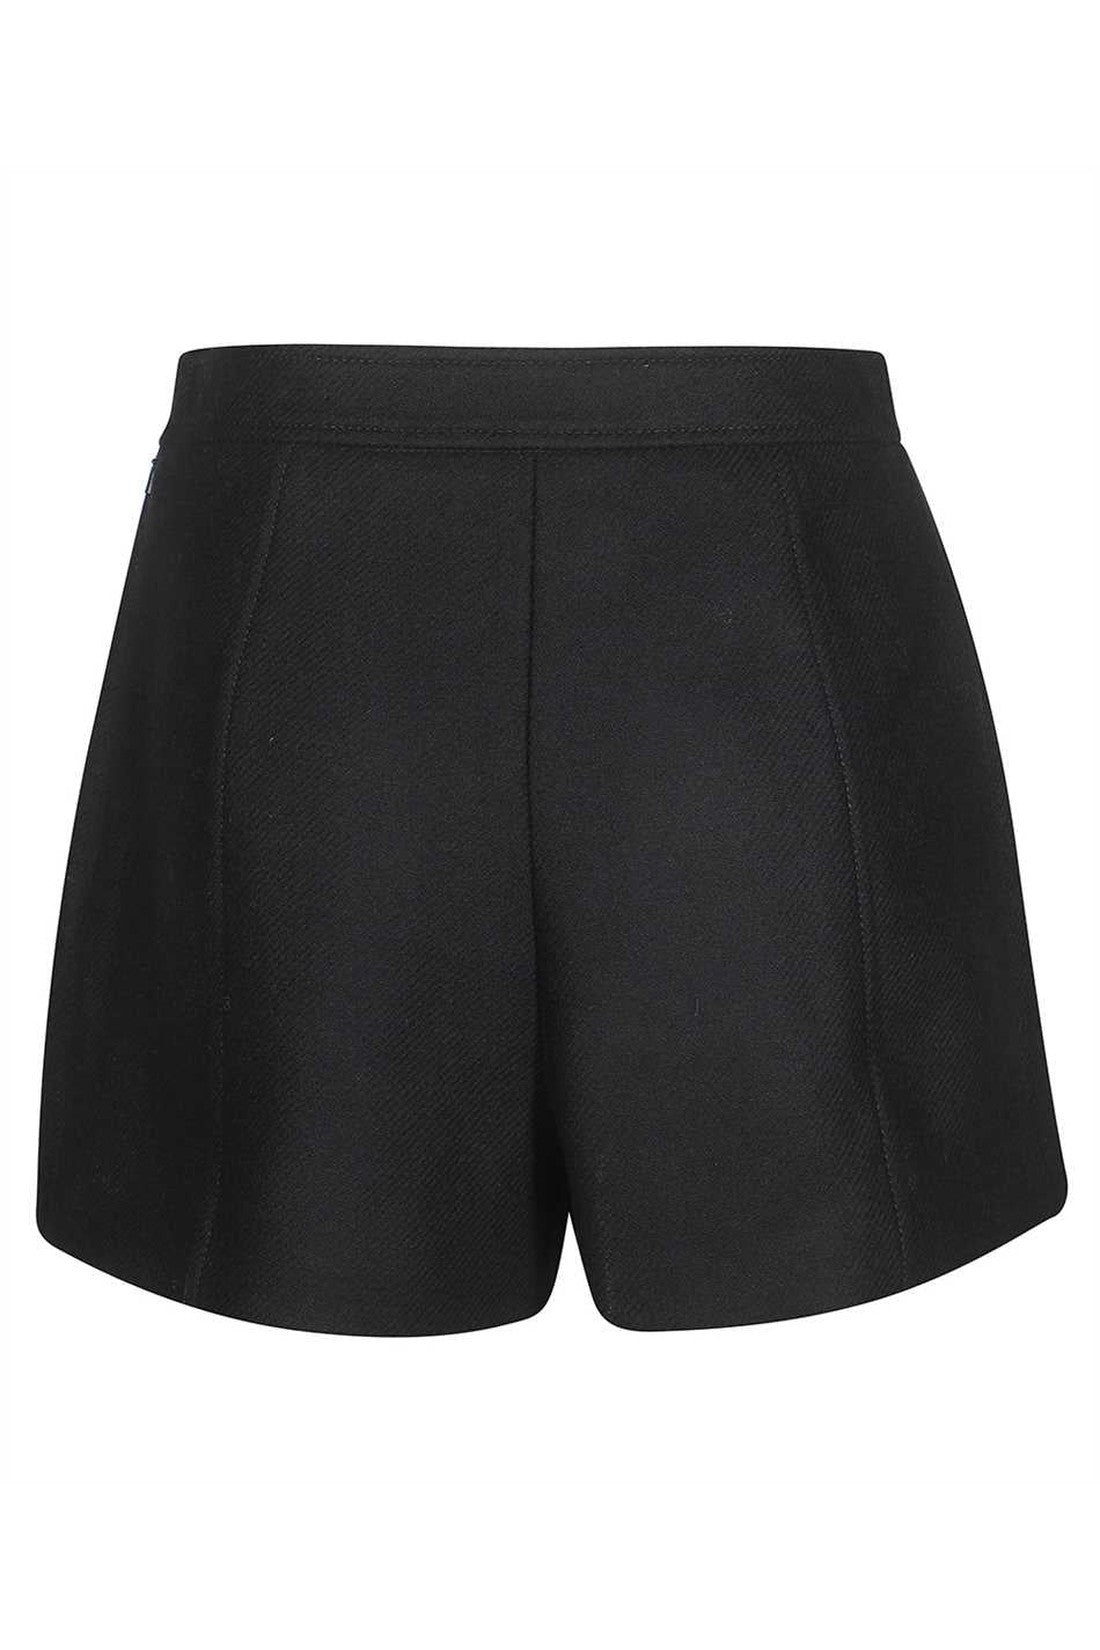 Wool shorts-Moschino-OUTLET-SALE-ARCHIVIST